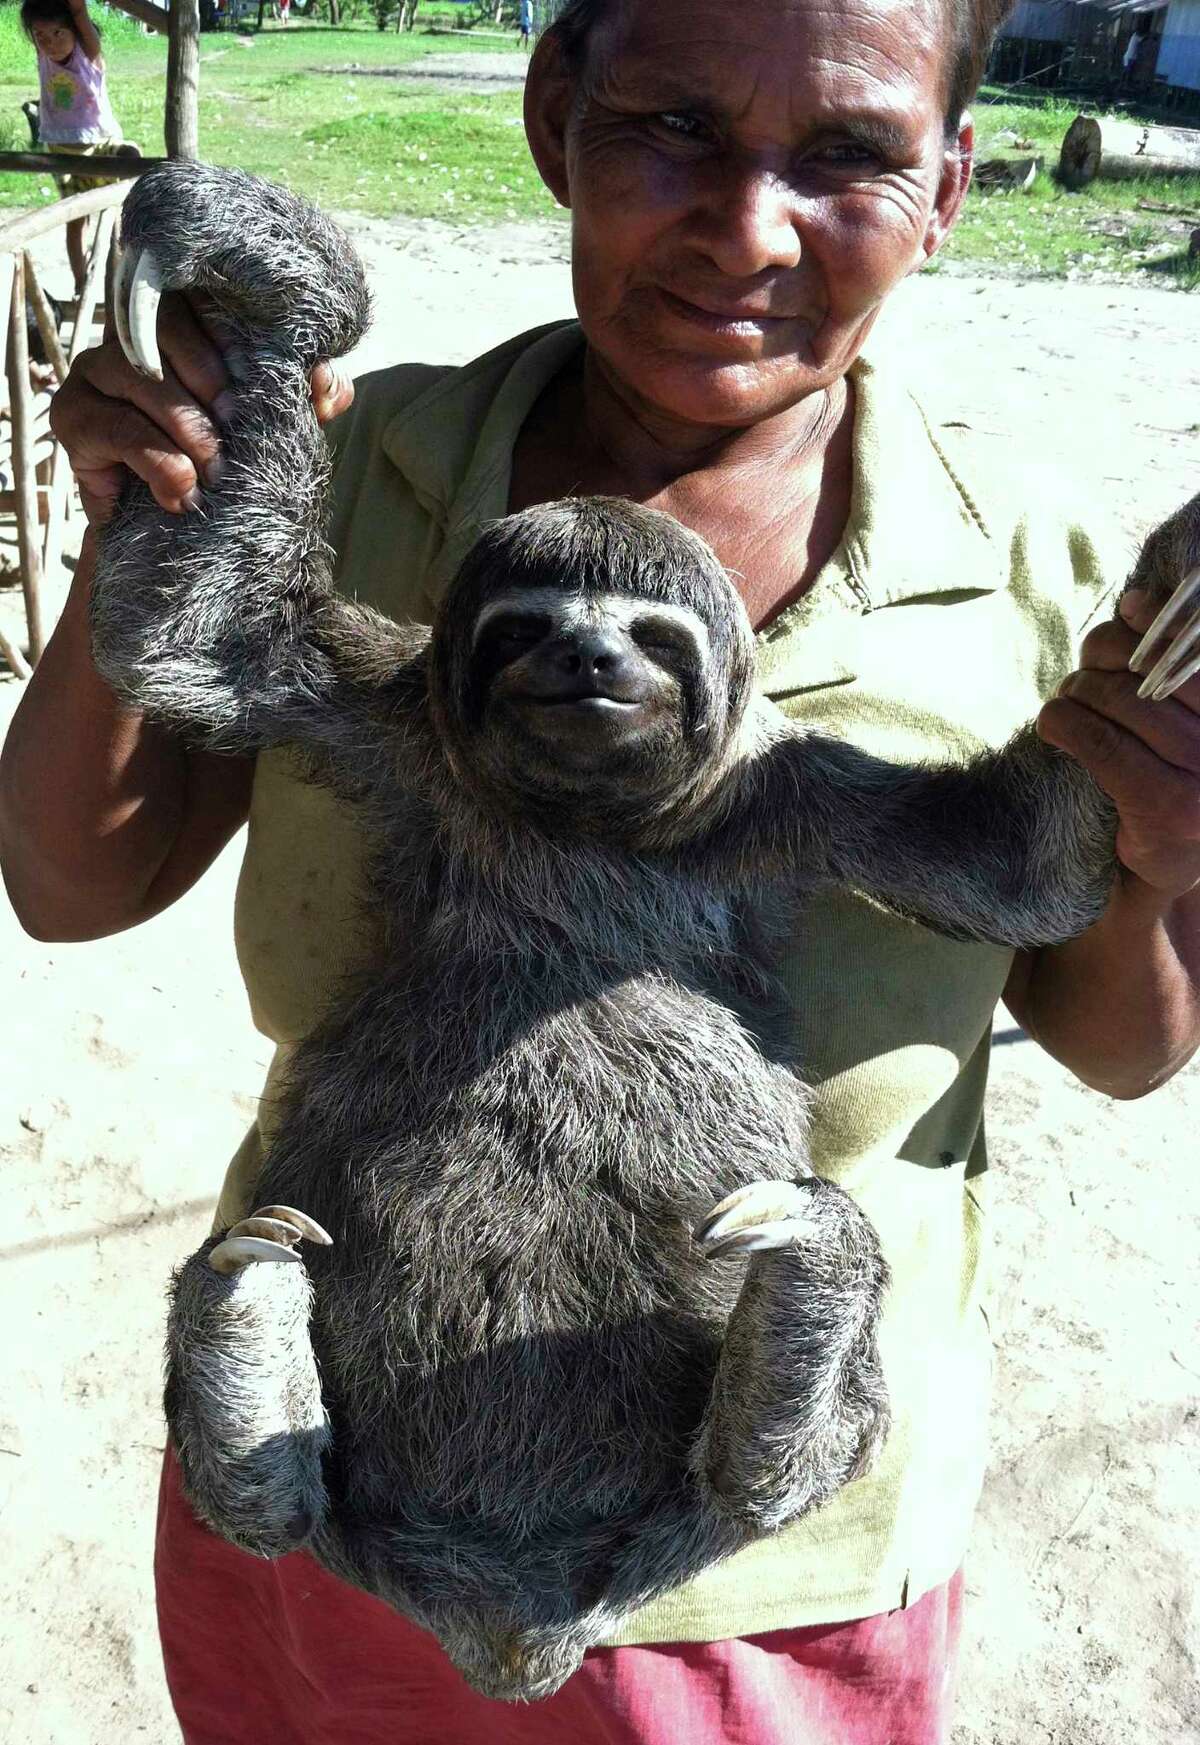 This Dec. 29, 2013 photo shows an indigenous woman in the Amazon River community of Puerto Alegria, Peru, presenting a sloth for petting and photos with visiting tourists. A recent report by World Animal Protection along with an investigation by National Geographic contends that animals are harmed by these encounters with tourists who hold them and take selfies with them. (Beth J. Harpaz/Associated Press) ORG XMIT: NYLS212